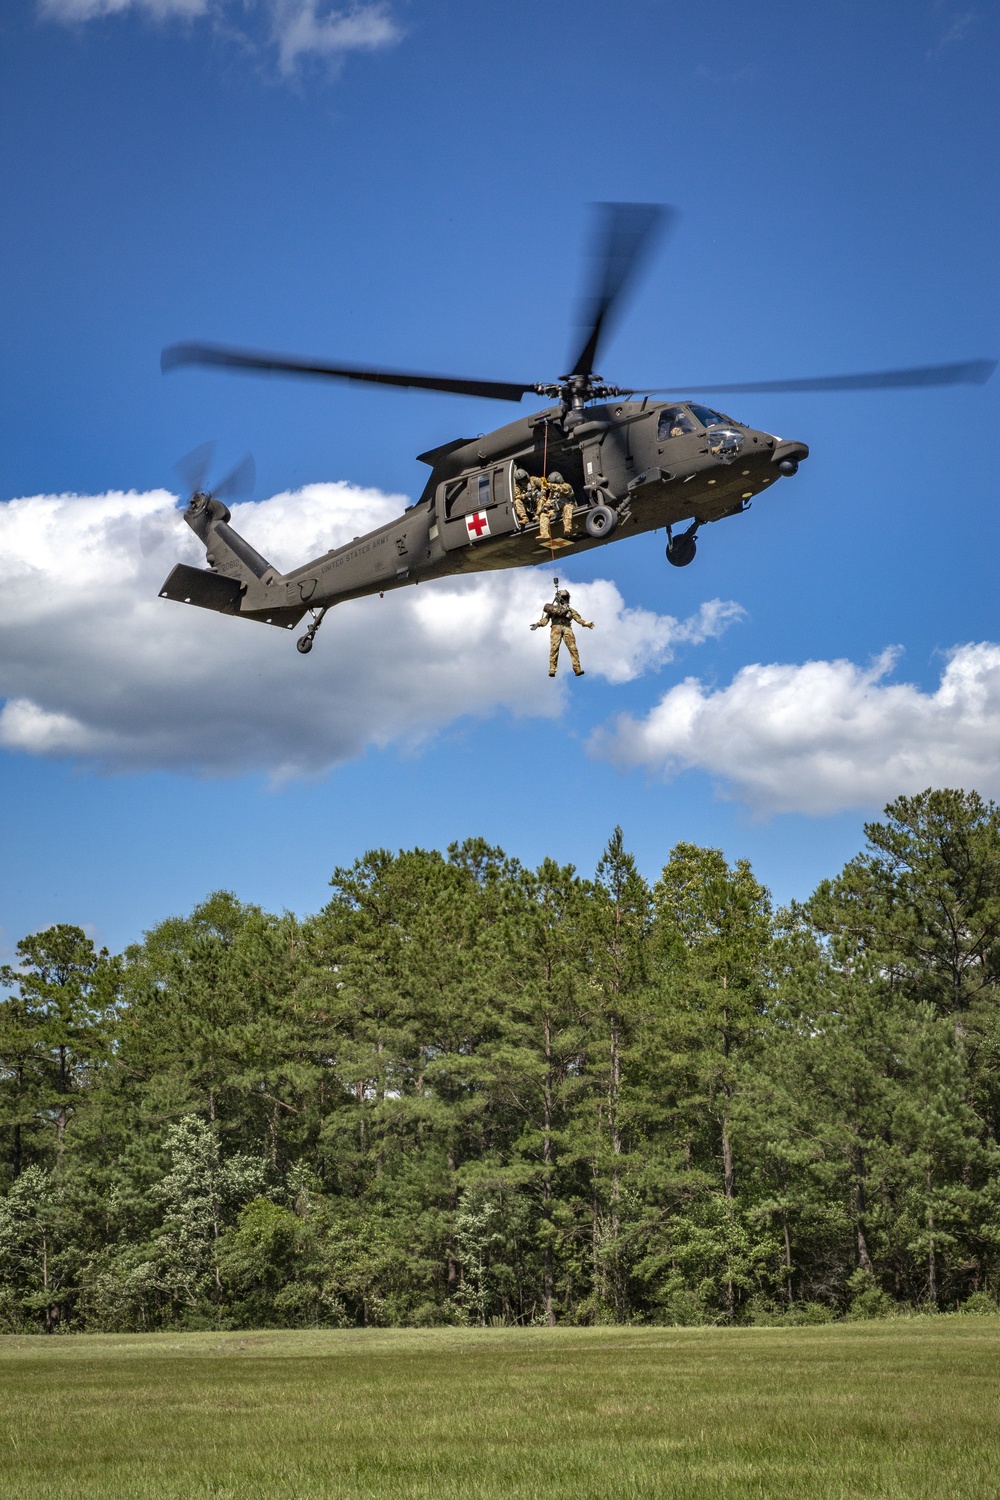 USAARL's UH-60M Black Hawk helicopter performing dynamic hoist operations